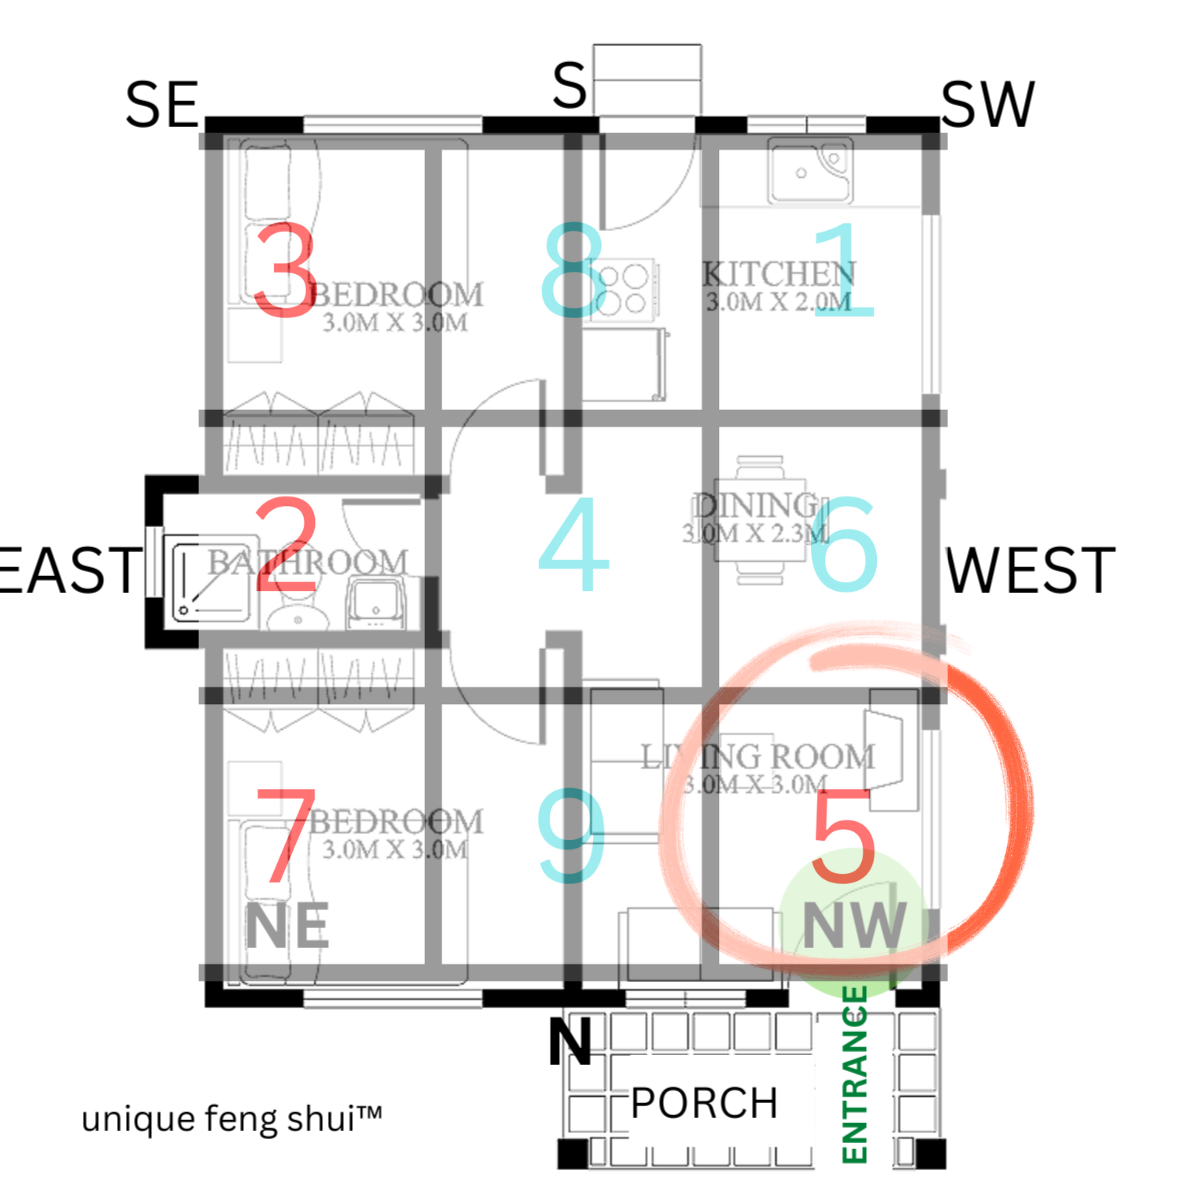 How To Use A Feng Shui Bagua Map In Your House Or Apartment